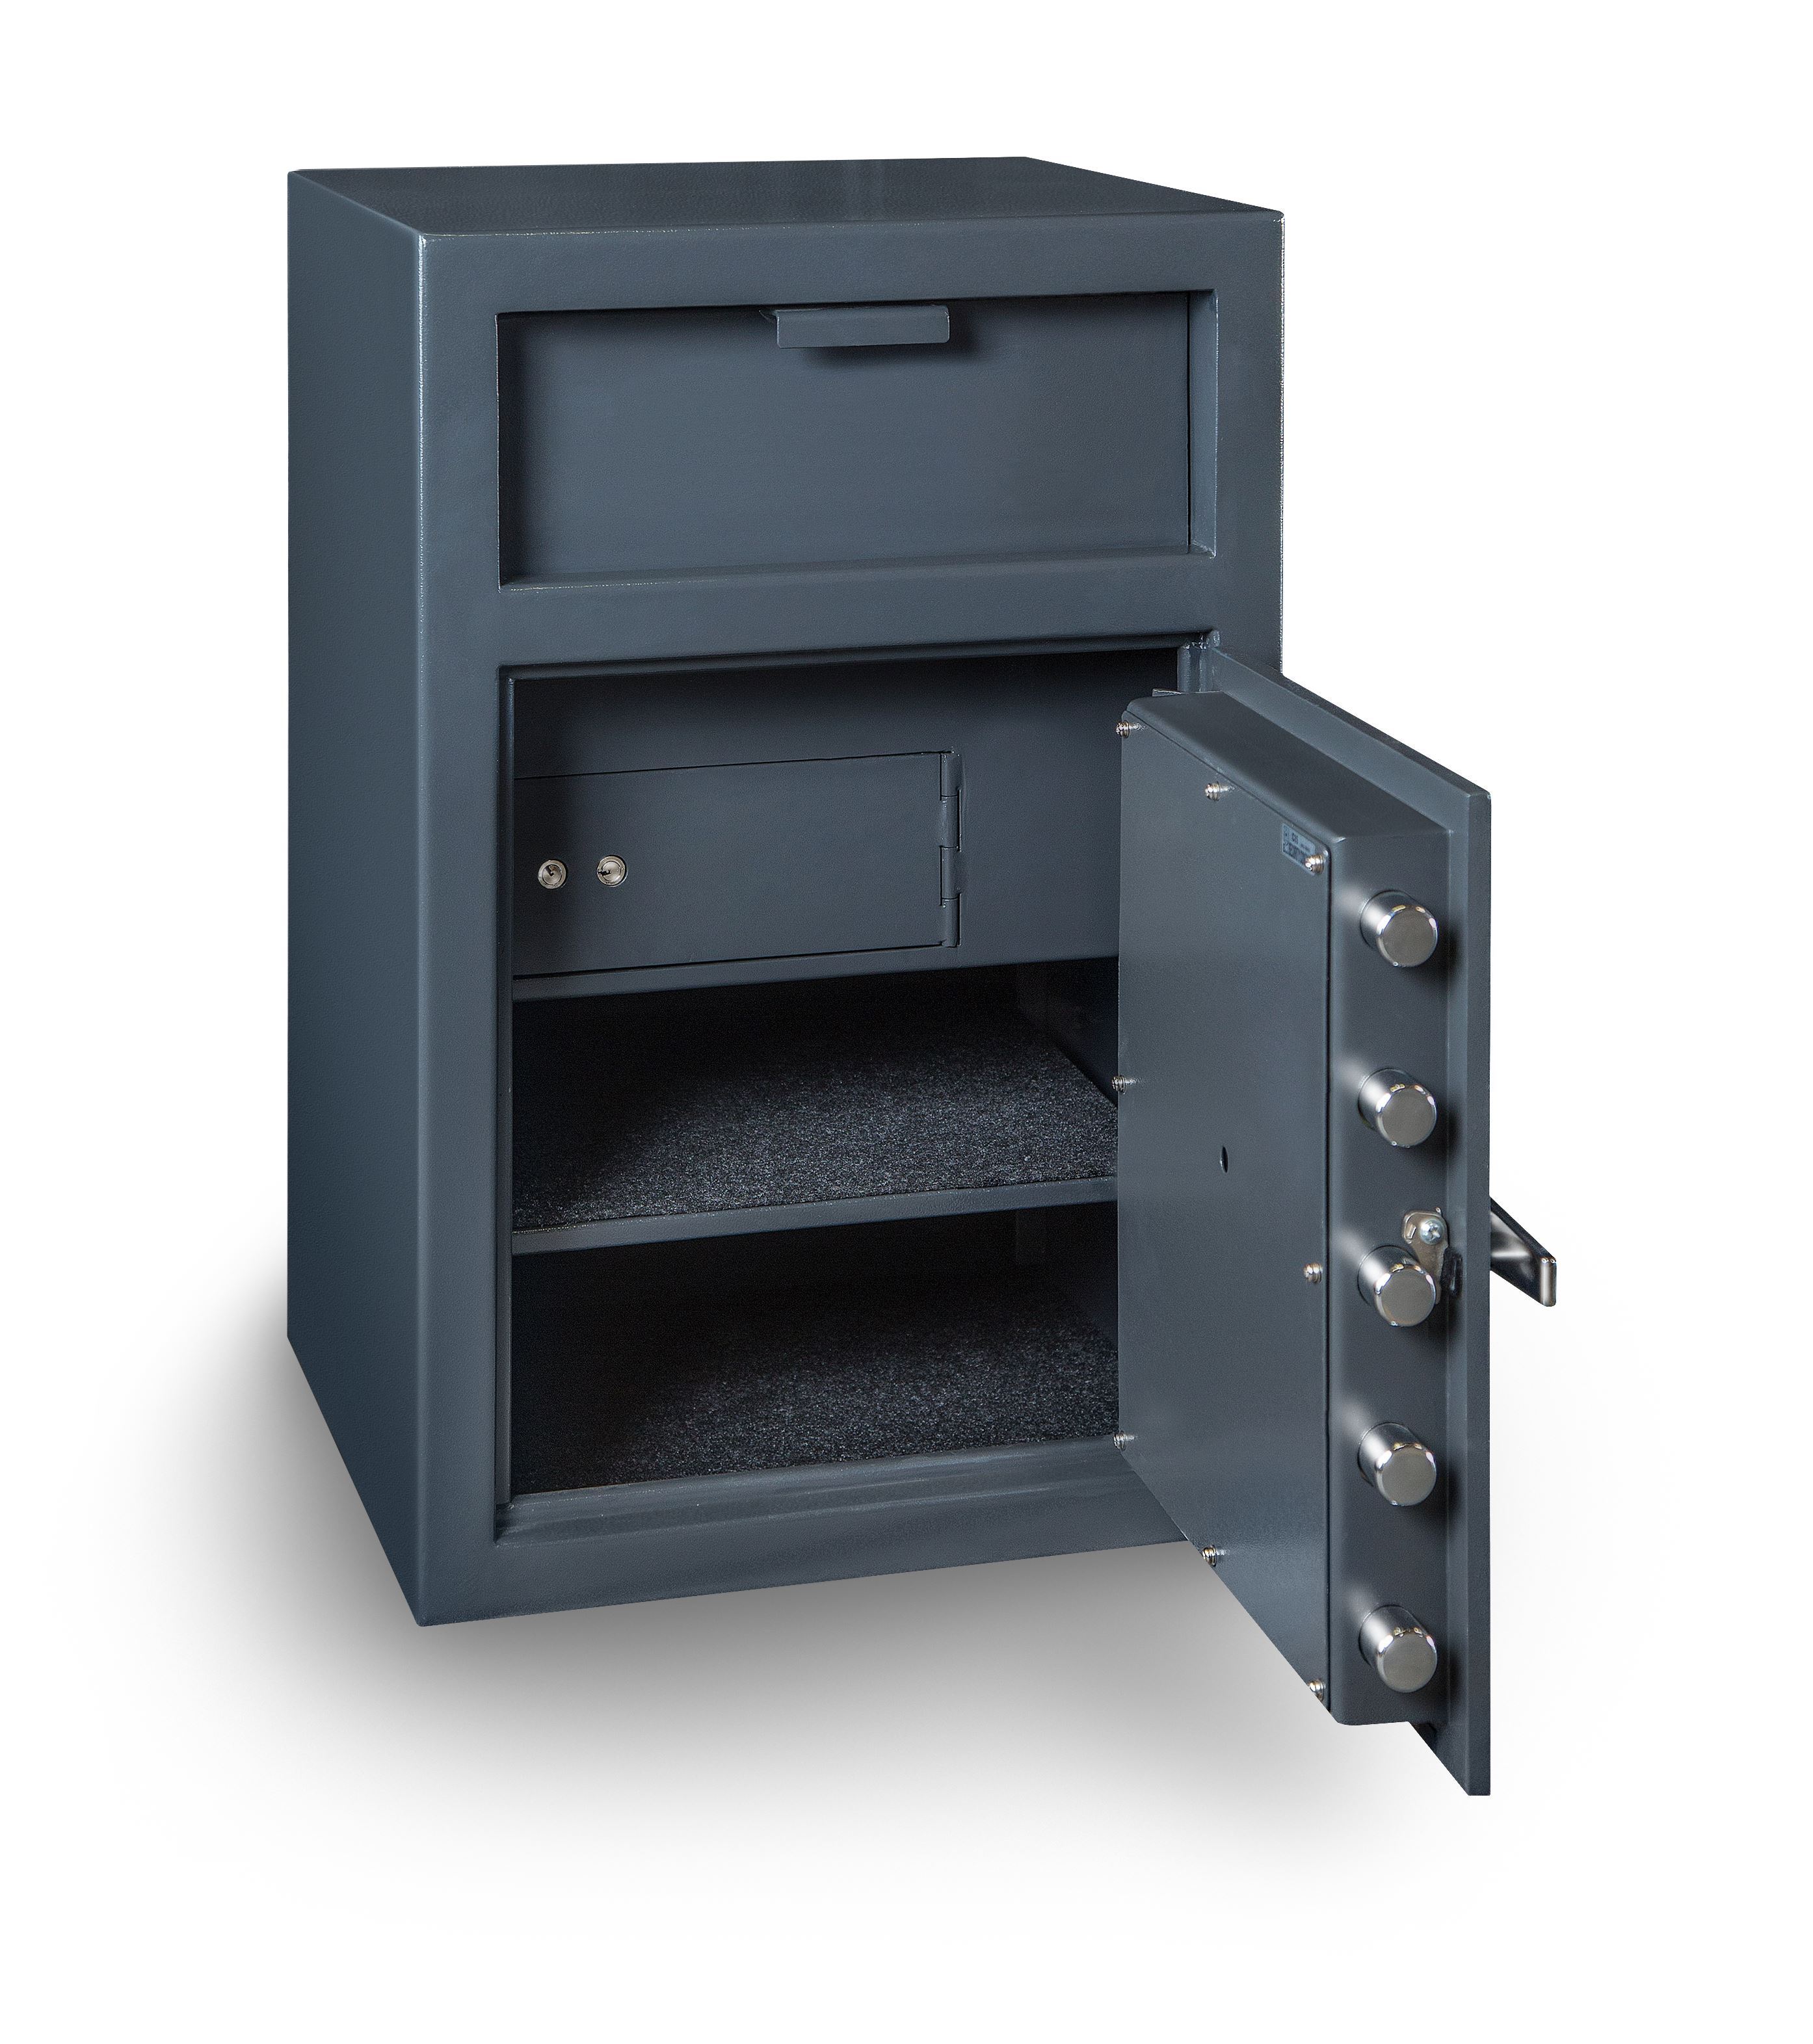 Depository Safe with inner locking department - FD-3020CILK